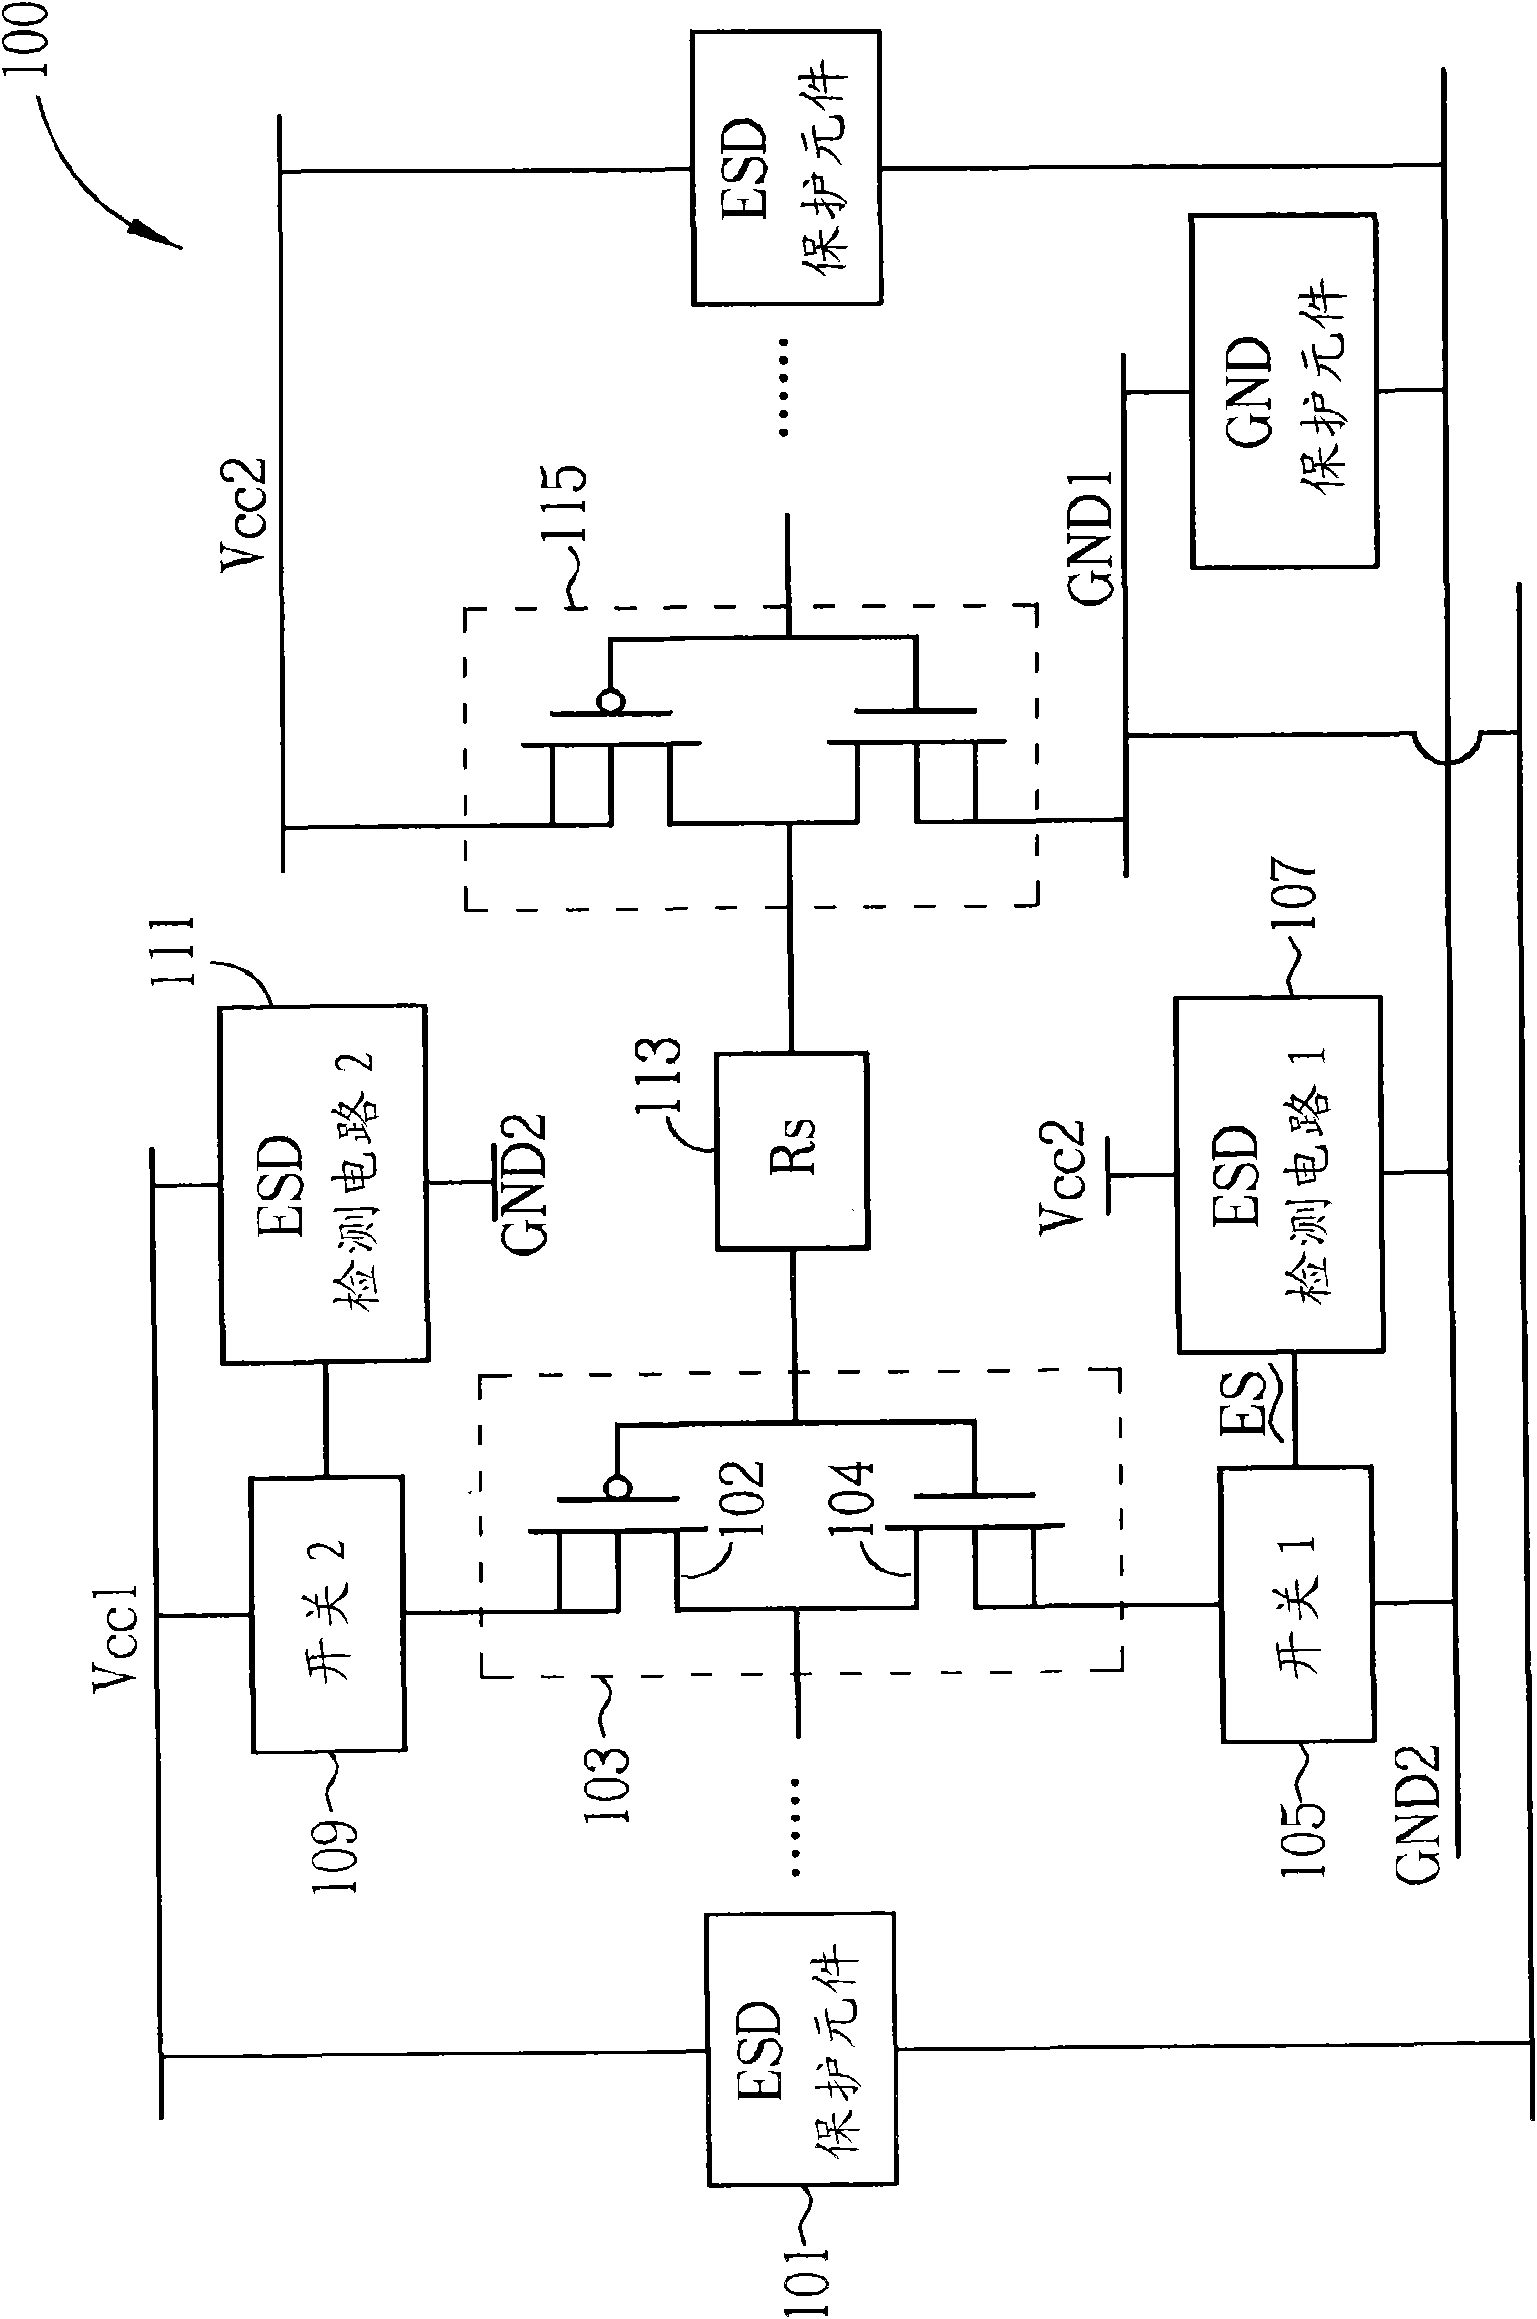 Electrostatic discharge protection circuit with multi-power area integrated circuit